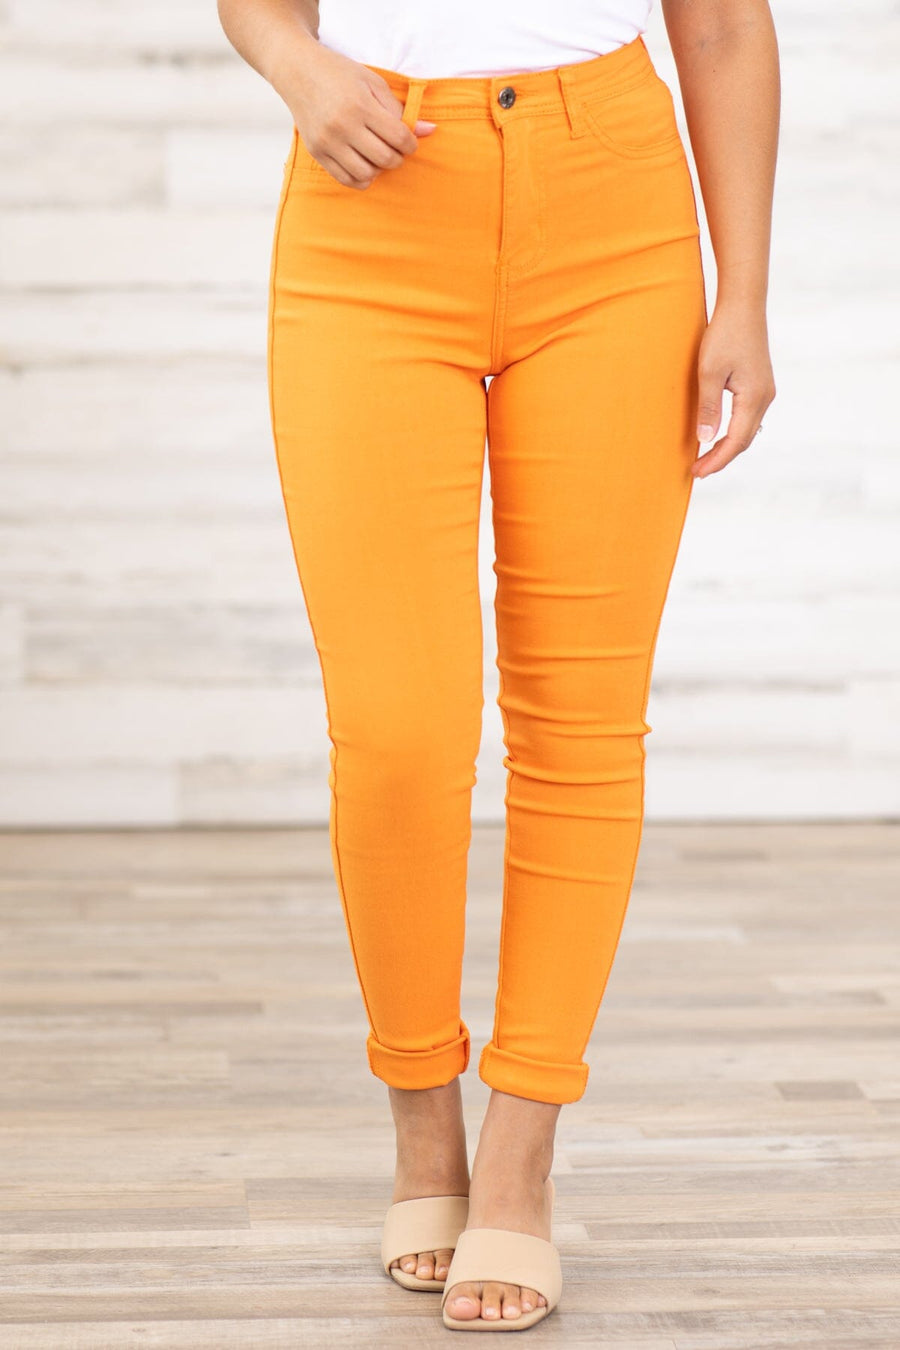 Orange Skinny Fit High Rise Pants - Filly Flair